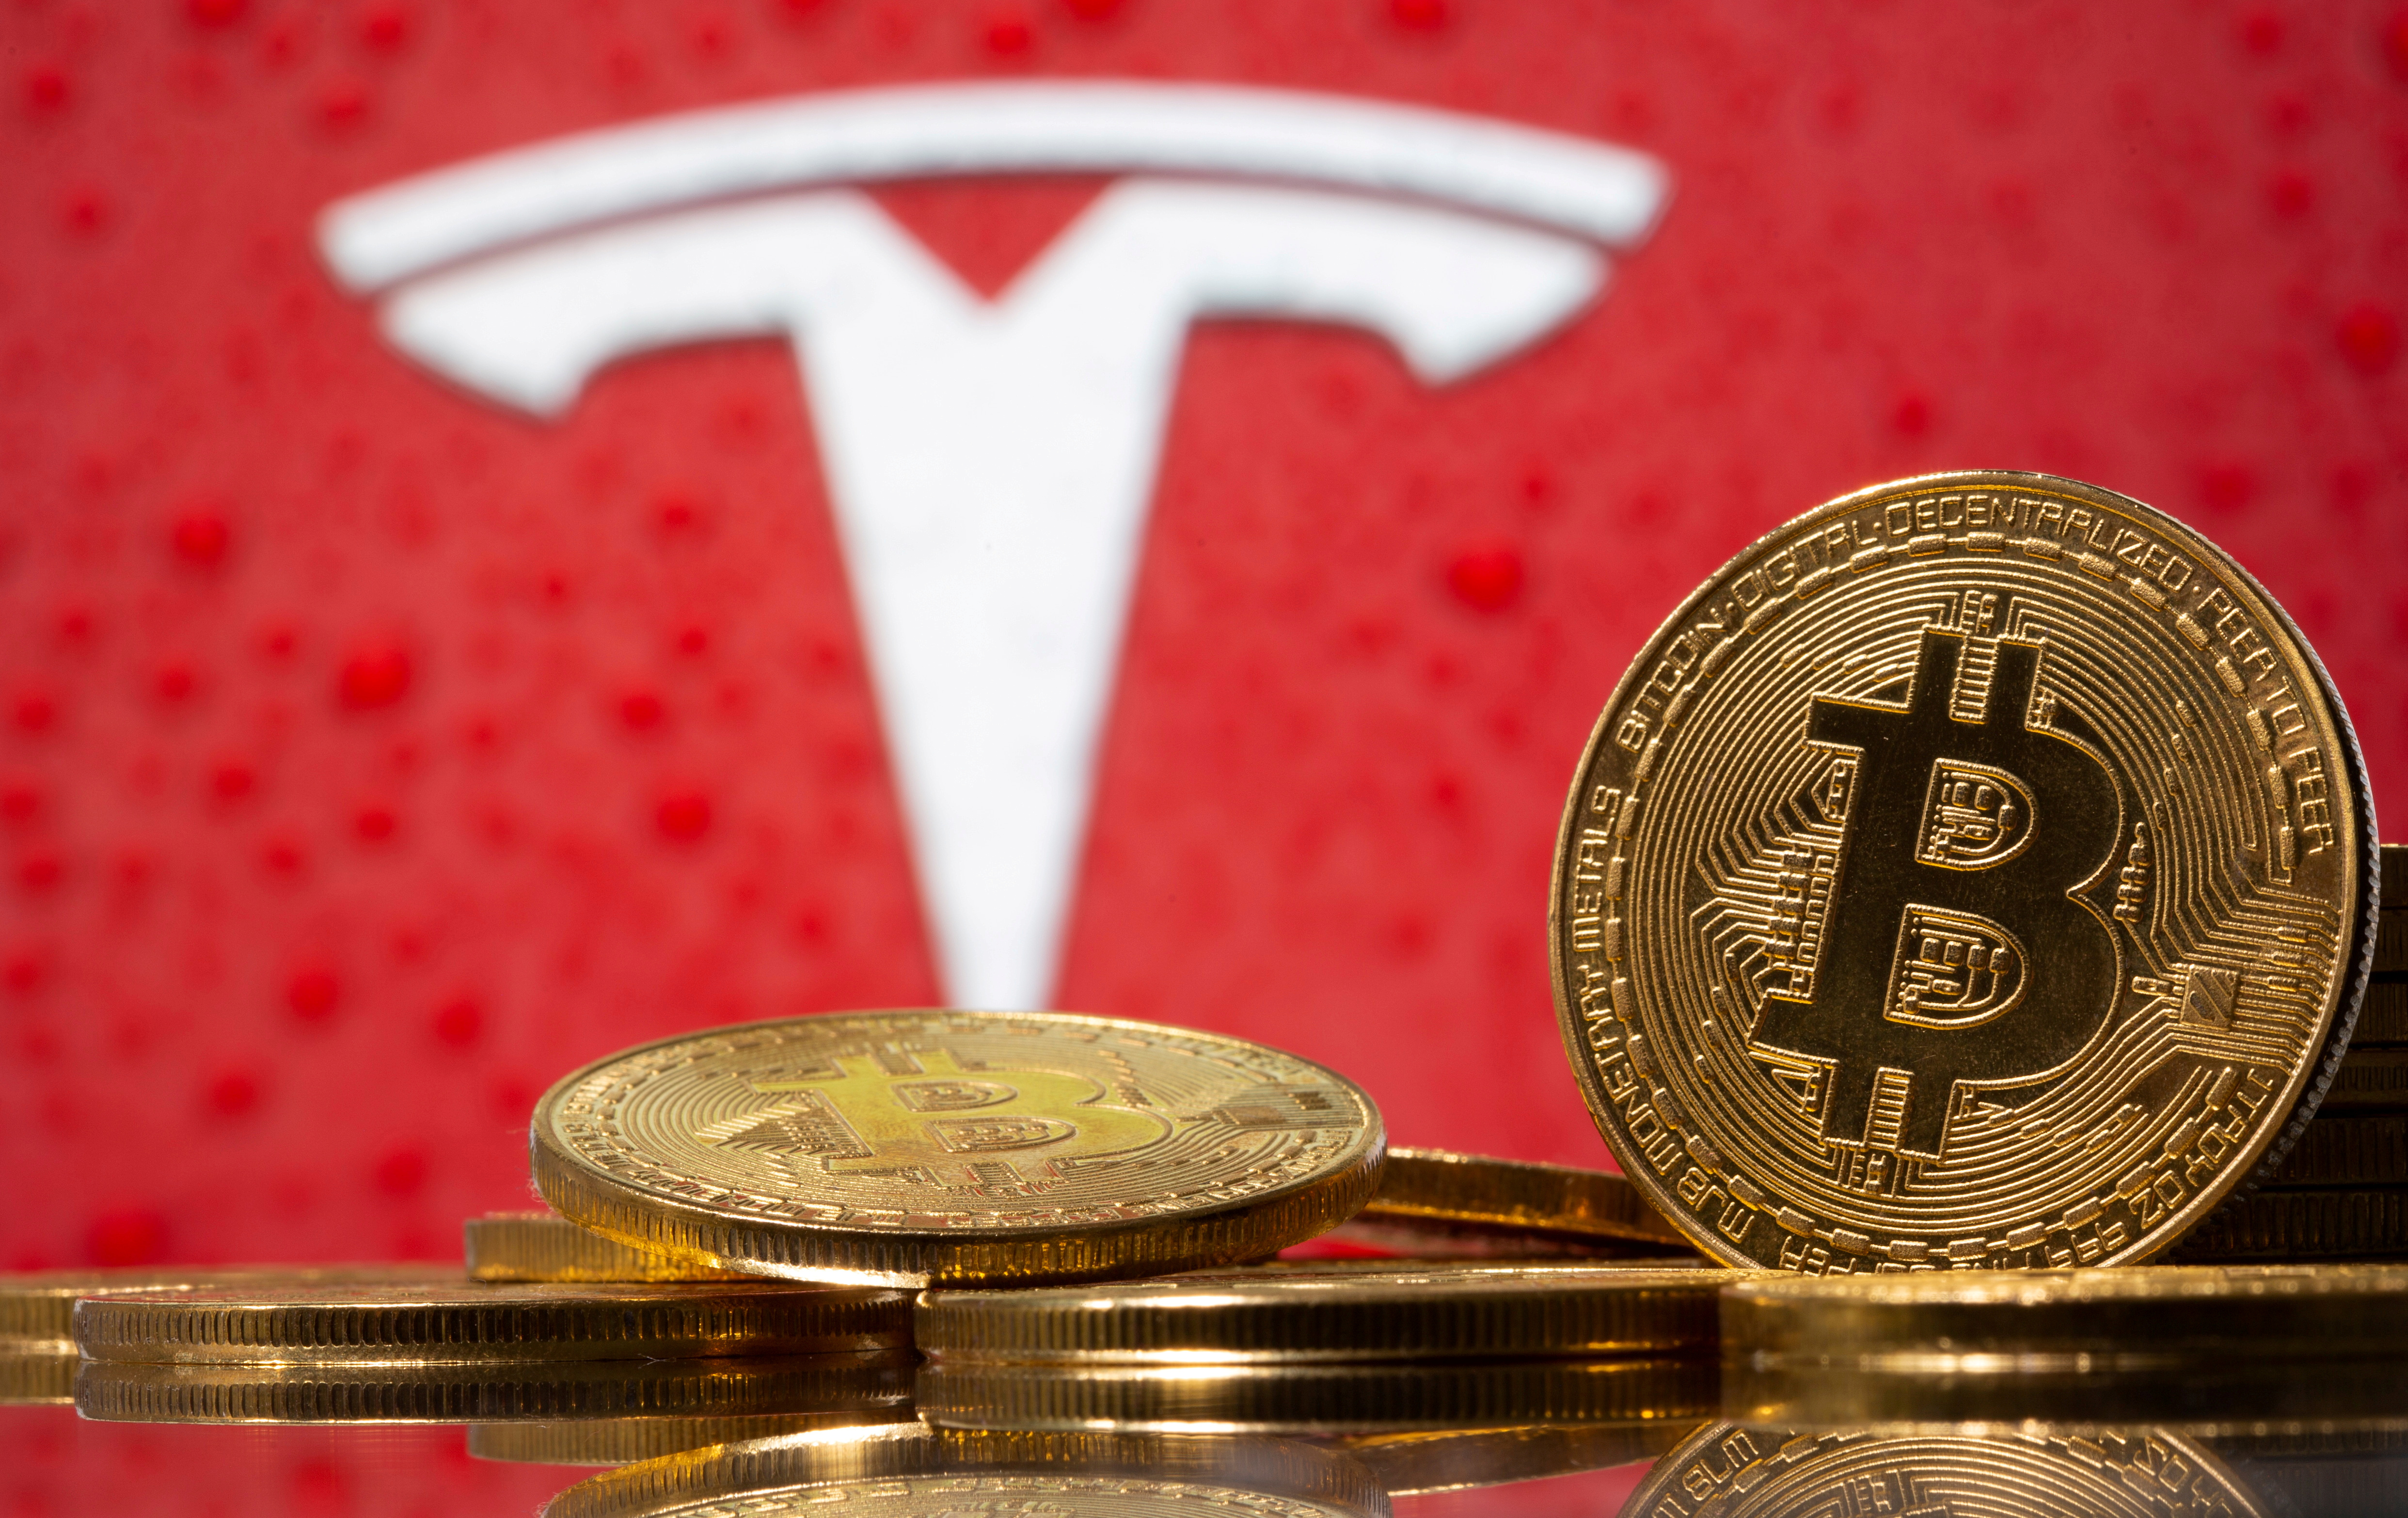 Representations of virtual currency Bitcoin are seen in front of Tesla logo in this illustration taken, February 9, 2021. REUTERS/Dado Ruvic/File Photo